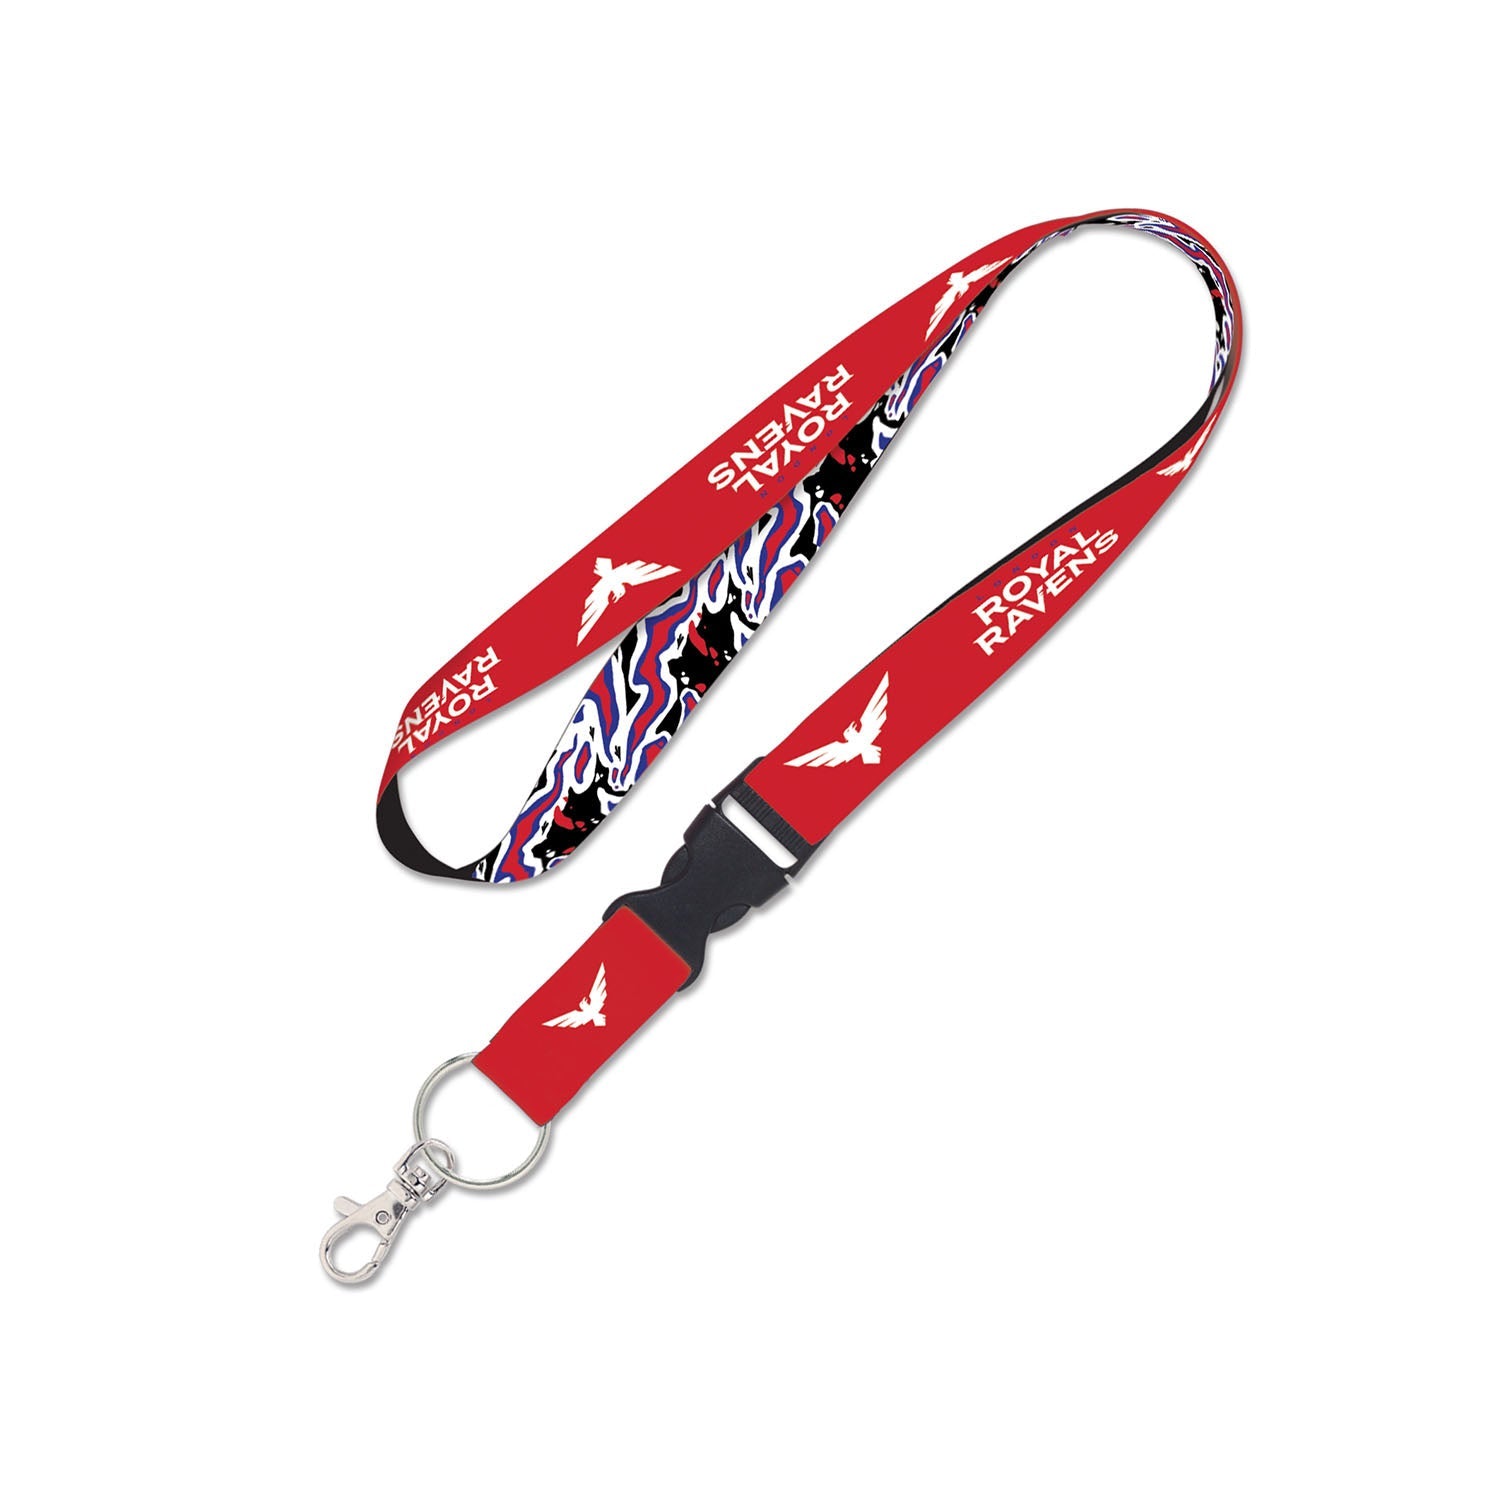 London Royal Ravens Camo Buckle Lanyard in Red - Front View